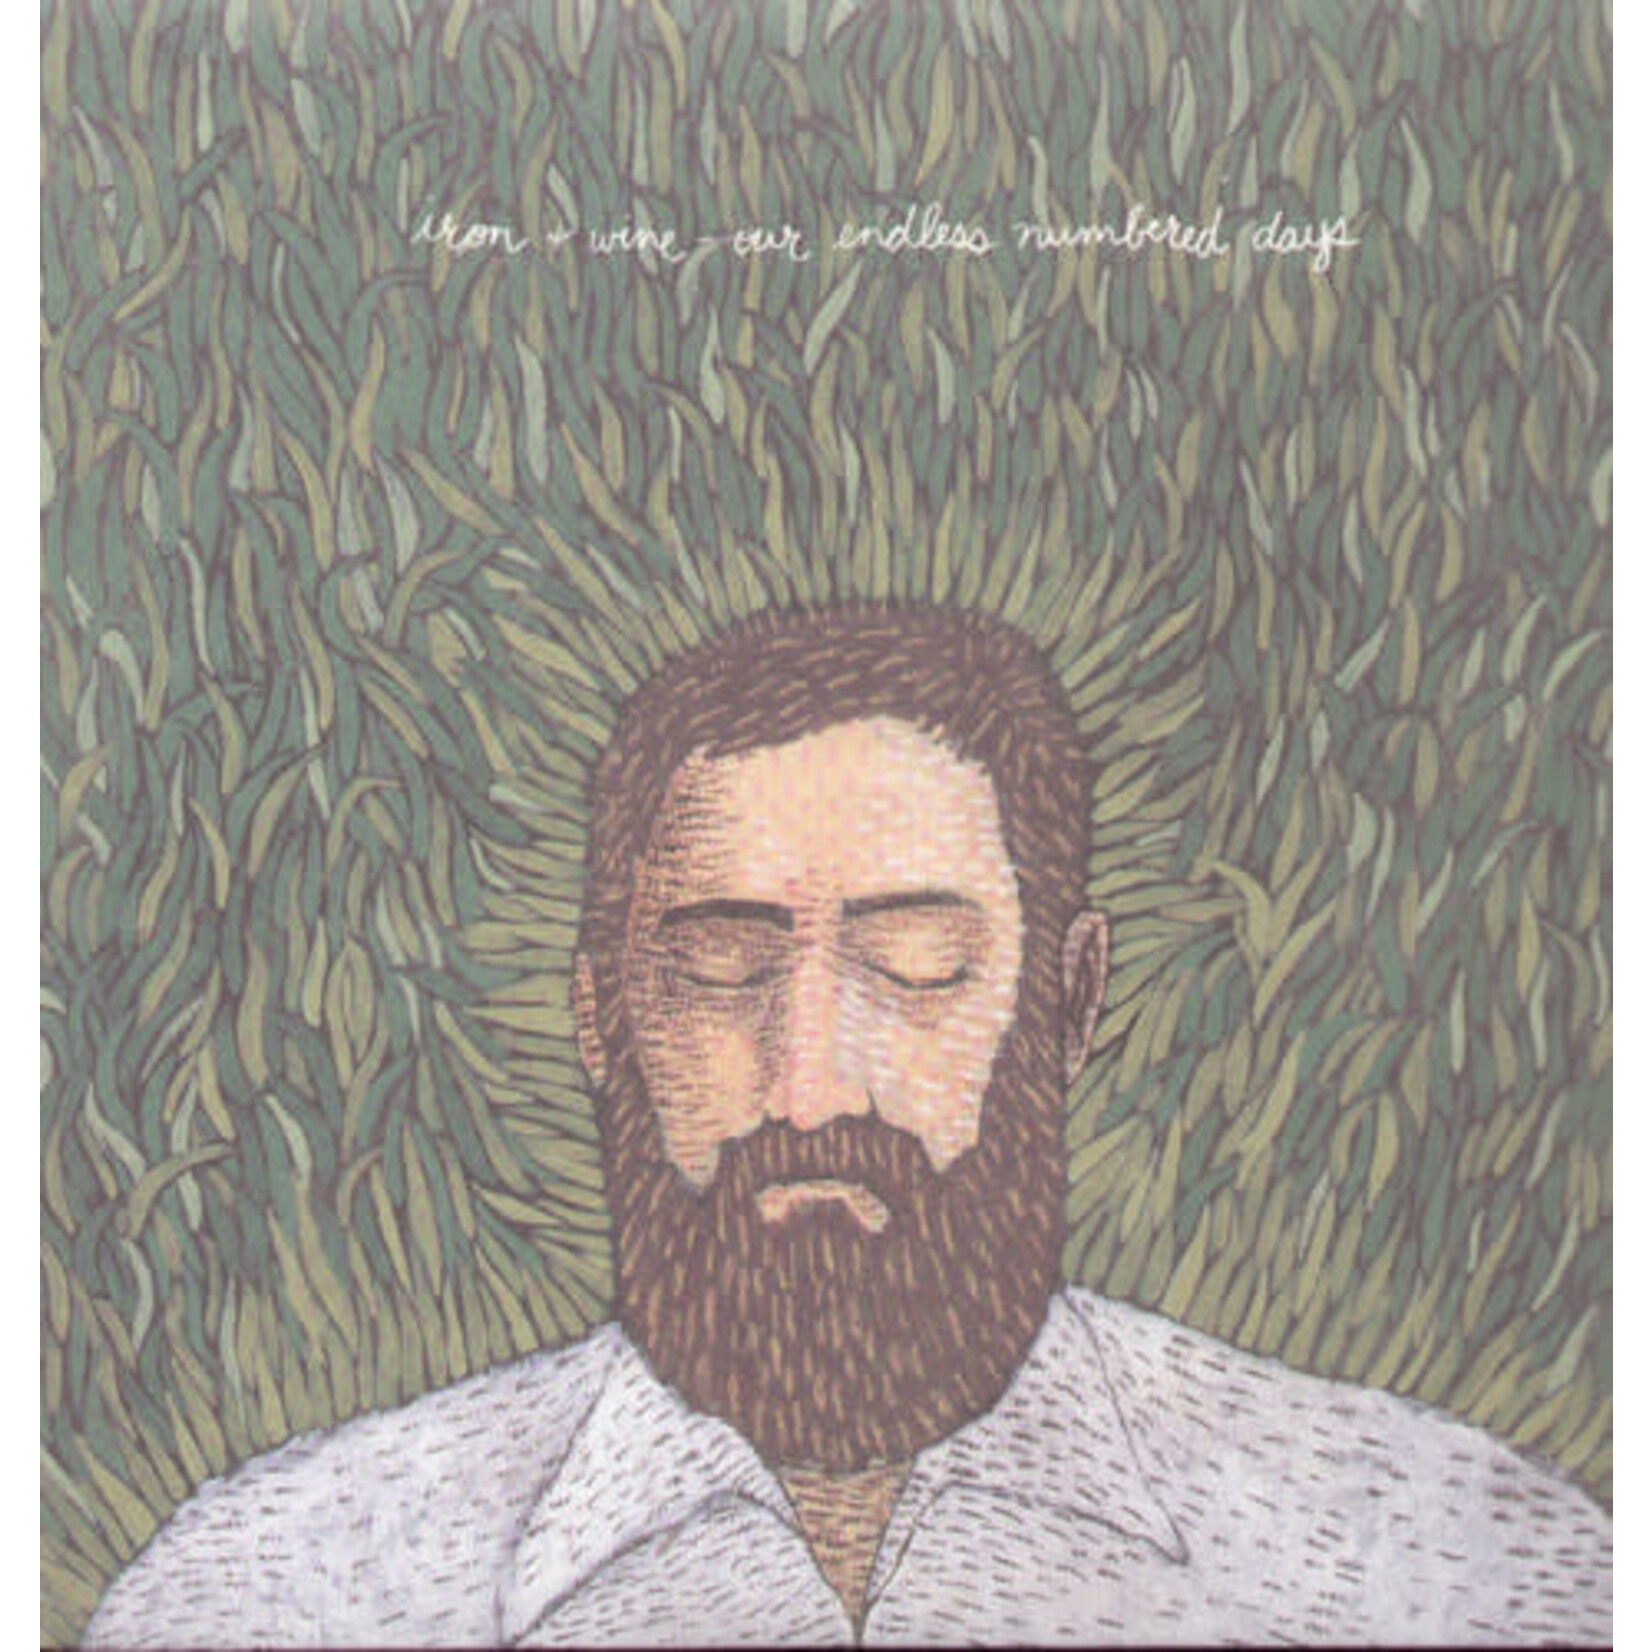 Sub Pop Iron & Wine - Our Endless Numbered Days (LP)